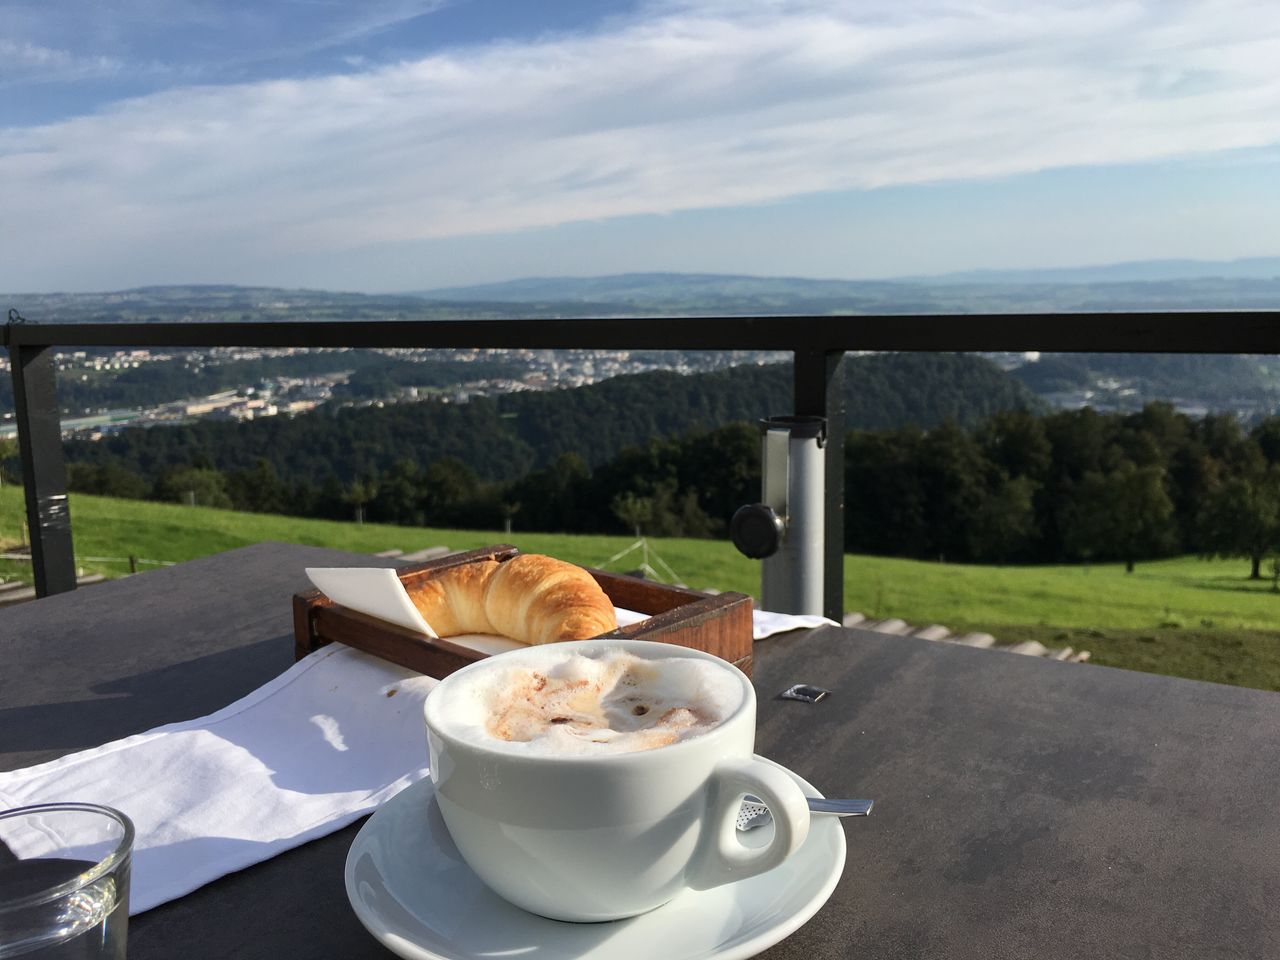 Croissant and coffee on table against mountain